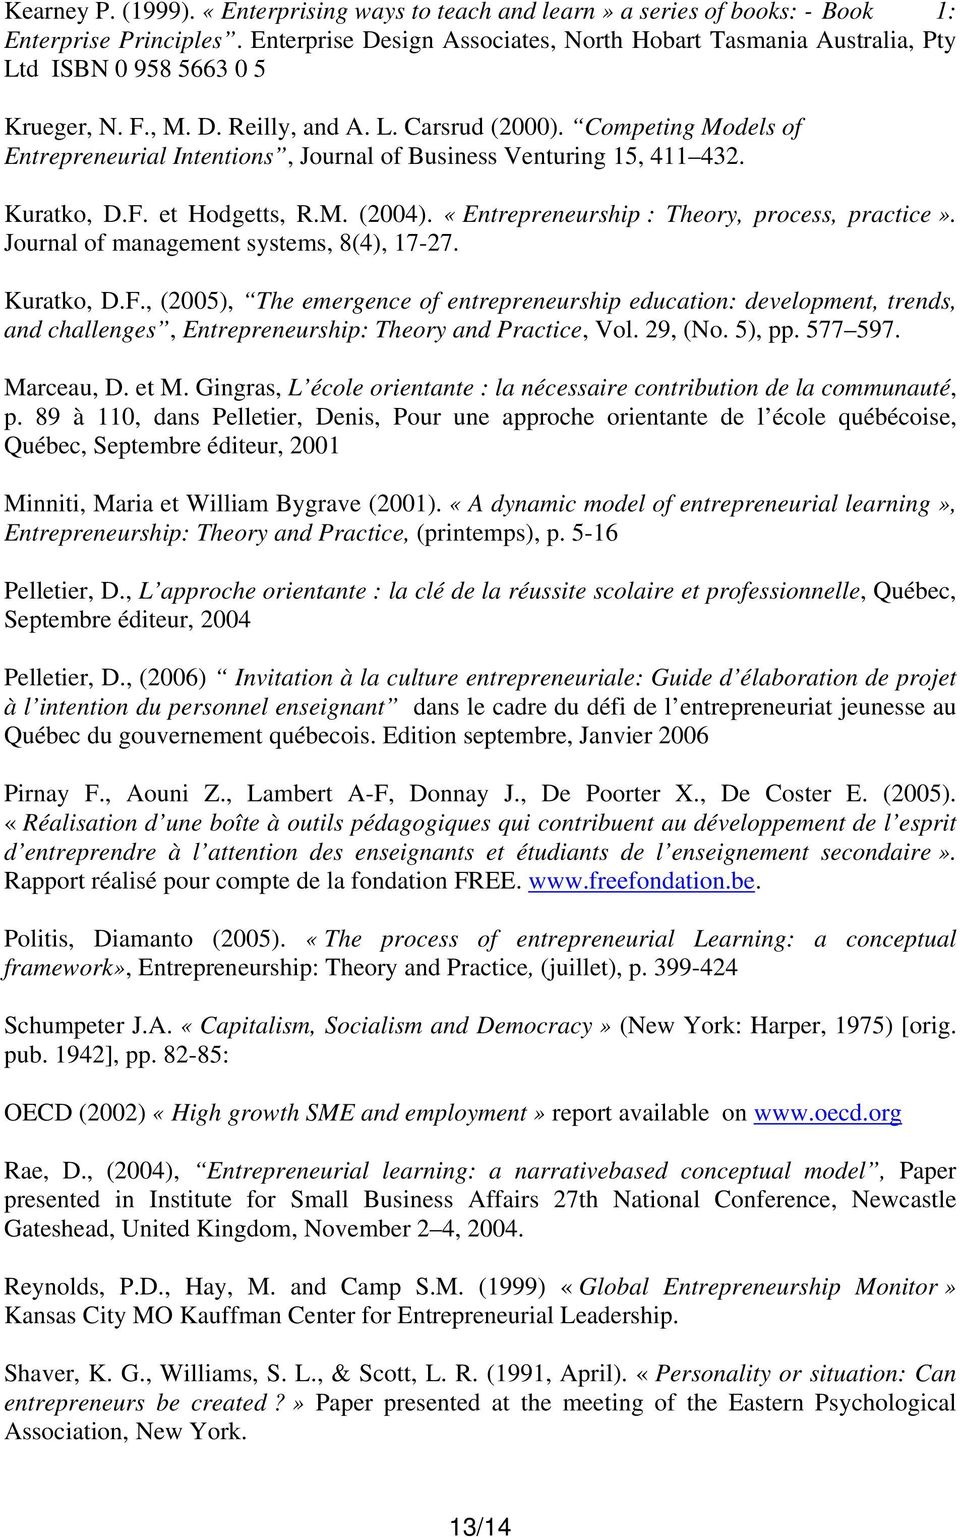 Competing Models of Entrepreneurial Intentions, Journal of Business Venturing 15, 411 432. Kuratko, D.F. et Hodgetts, R.M. (2004). «Entrepreneurship : Theory, process, practice».